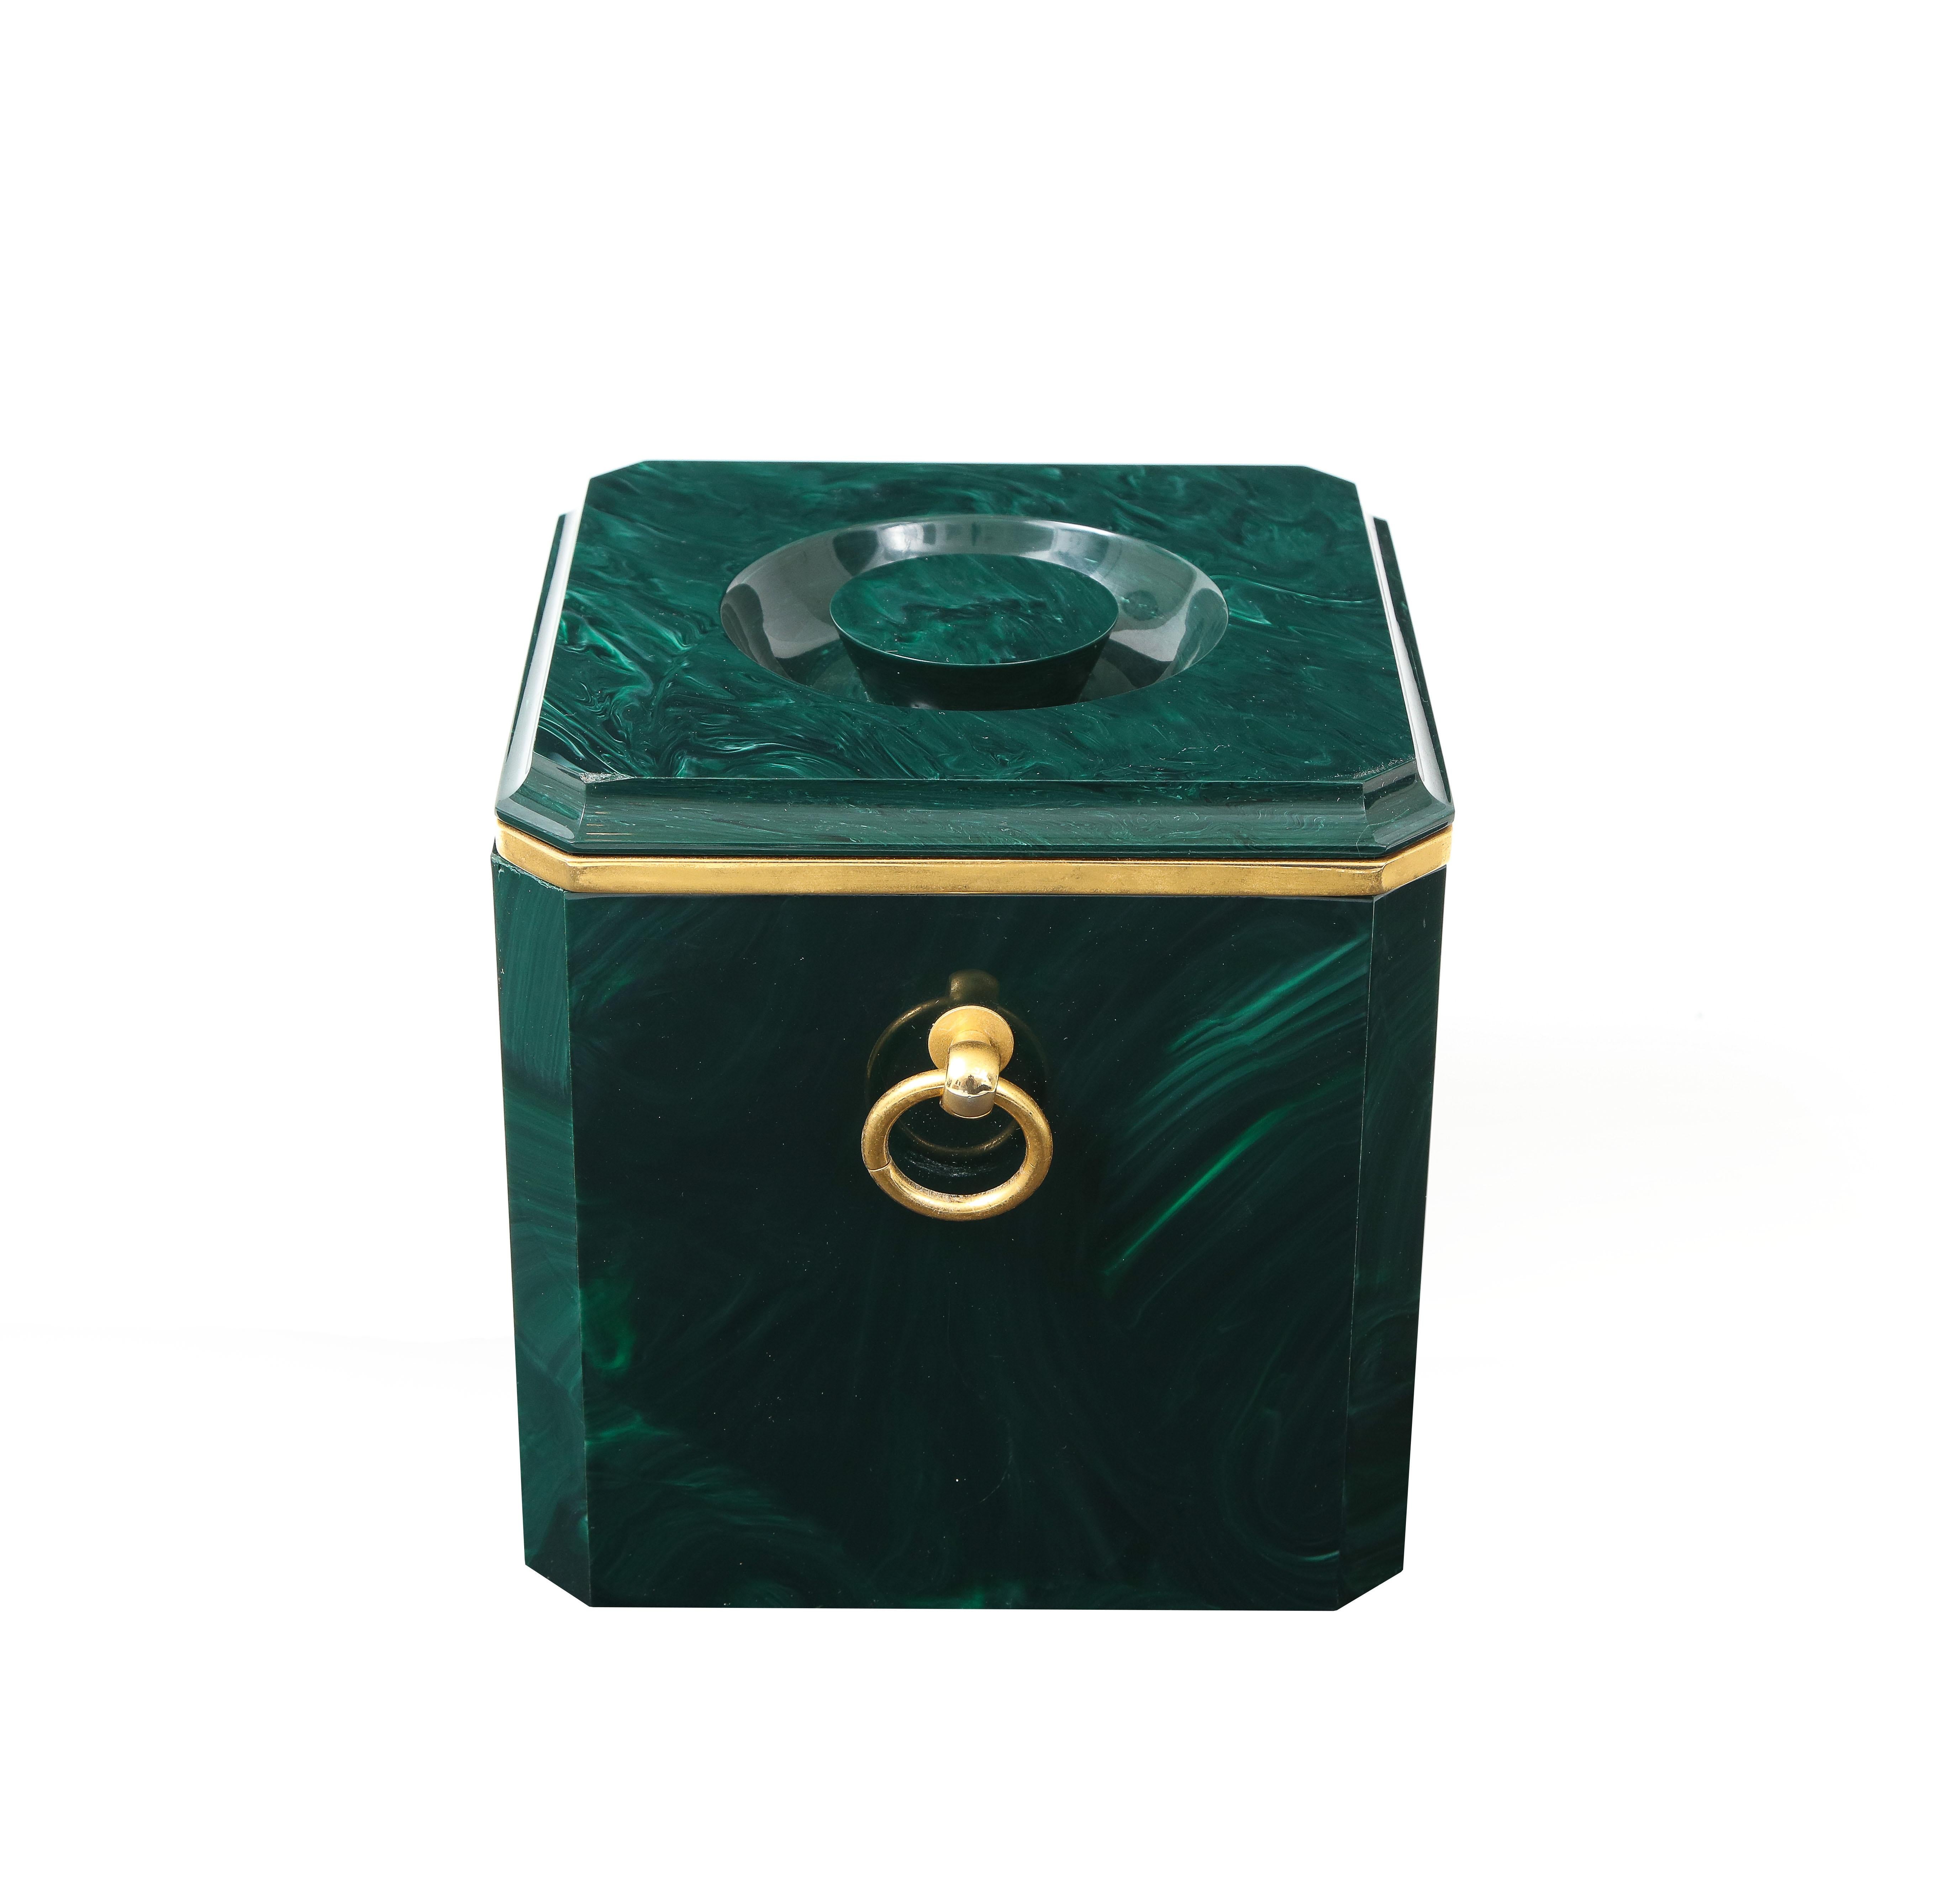 Aldo Tura Faux Malachite Ice Bucket with Brass Rings, Italy, 1970s For Sale 1